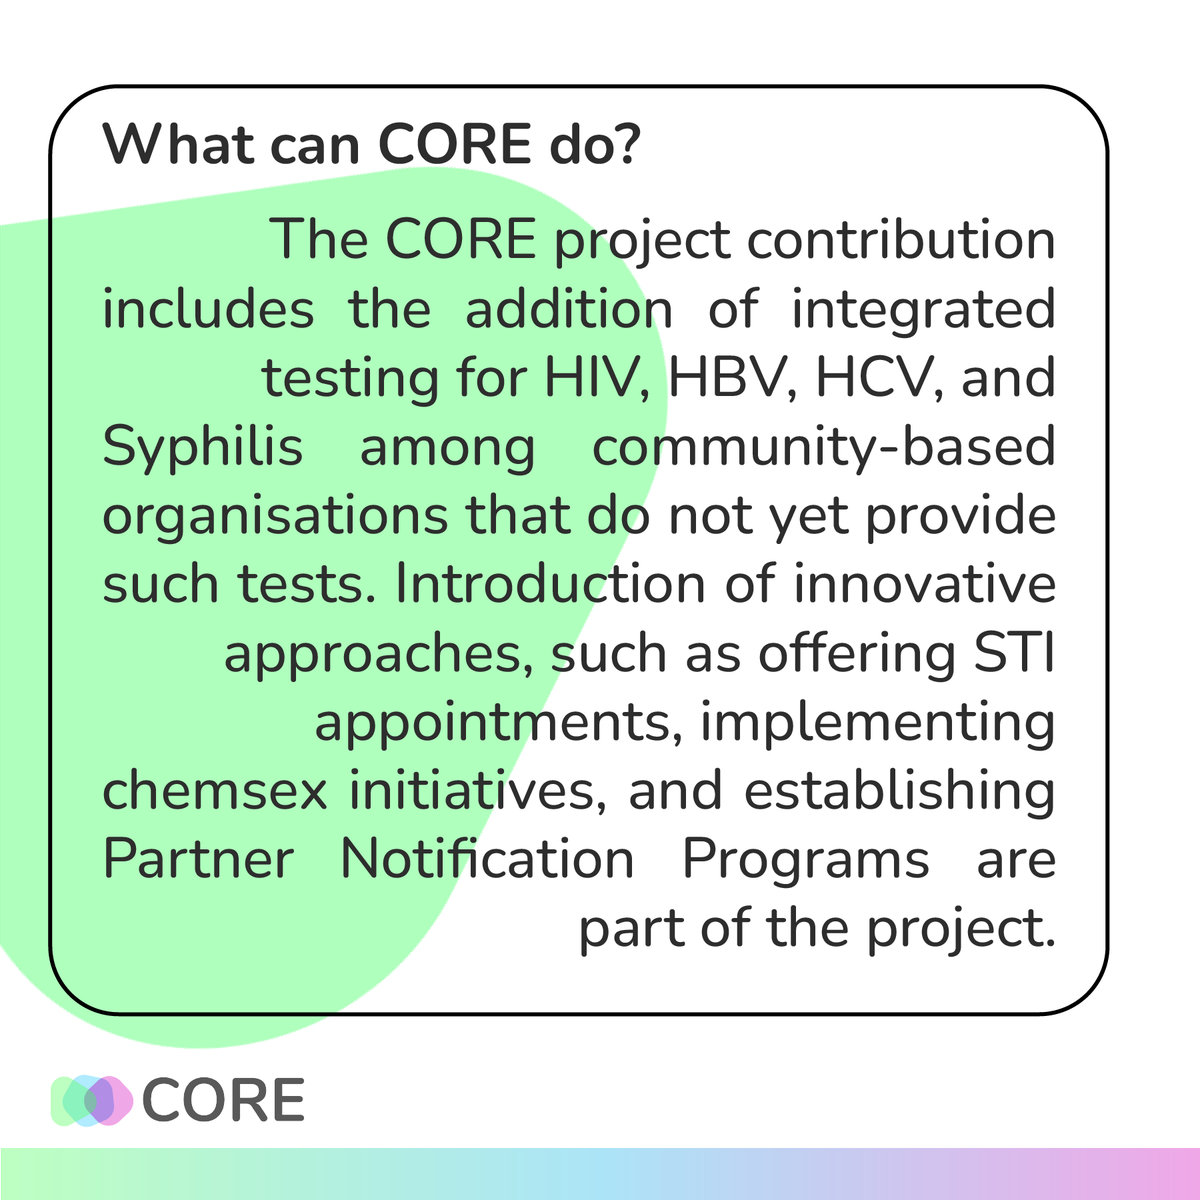 Last year, CORE conducted a needs assessment questionnaire among 14 community-based organisations - CORE partners. Here's what we discovered: #COREActionEU #COmmunityREsponse #EU4Health #HealthUnion